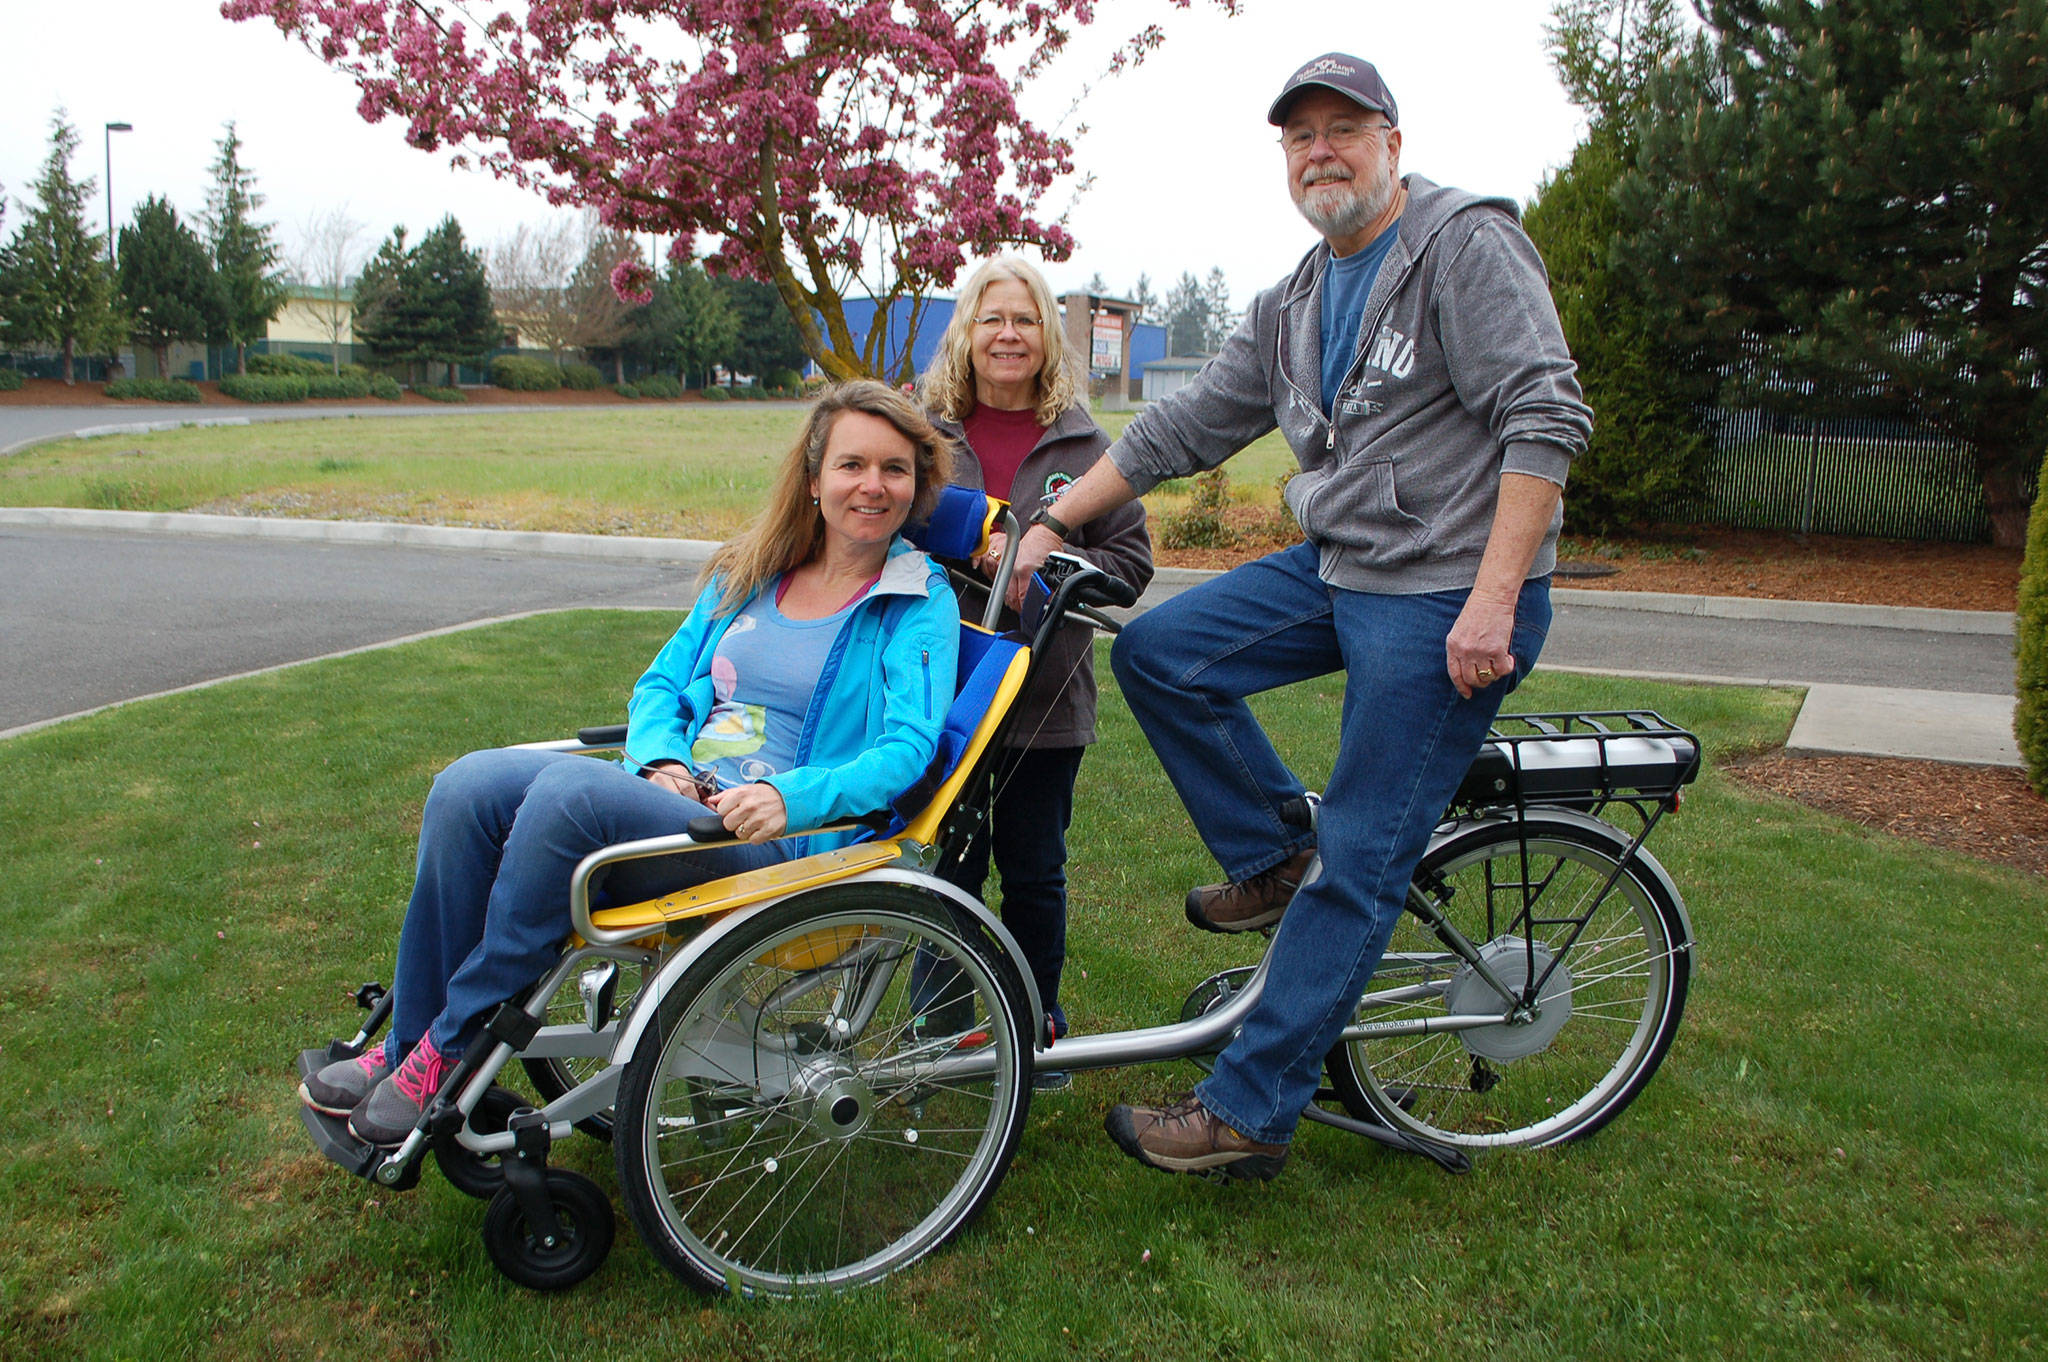 The Sequim Wheelers founder and Board president Nicole Lepping, foreground, and Board members Susan Hedding and Paul Muncey take its first wheelchair bike out for a spin near Ben’s Bikes in Sequim. Erin Hawkins/Olympic Peninsula News Group